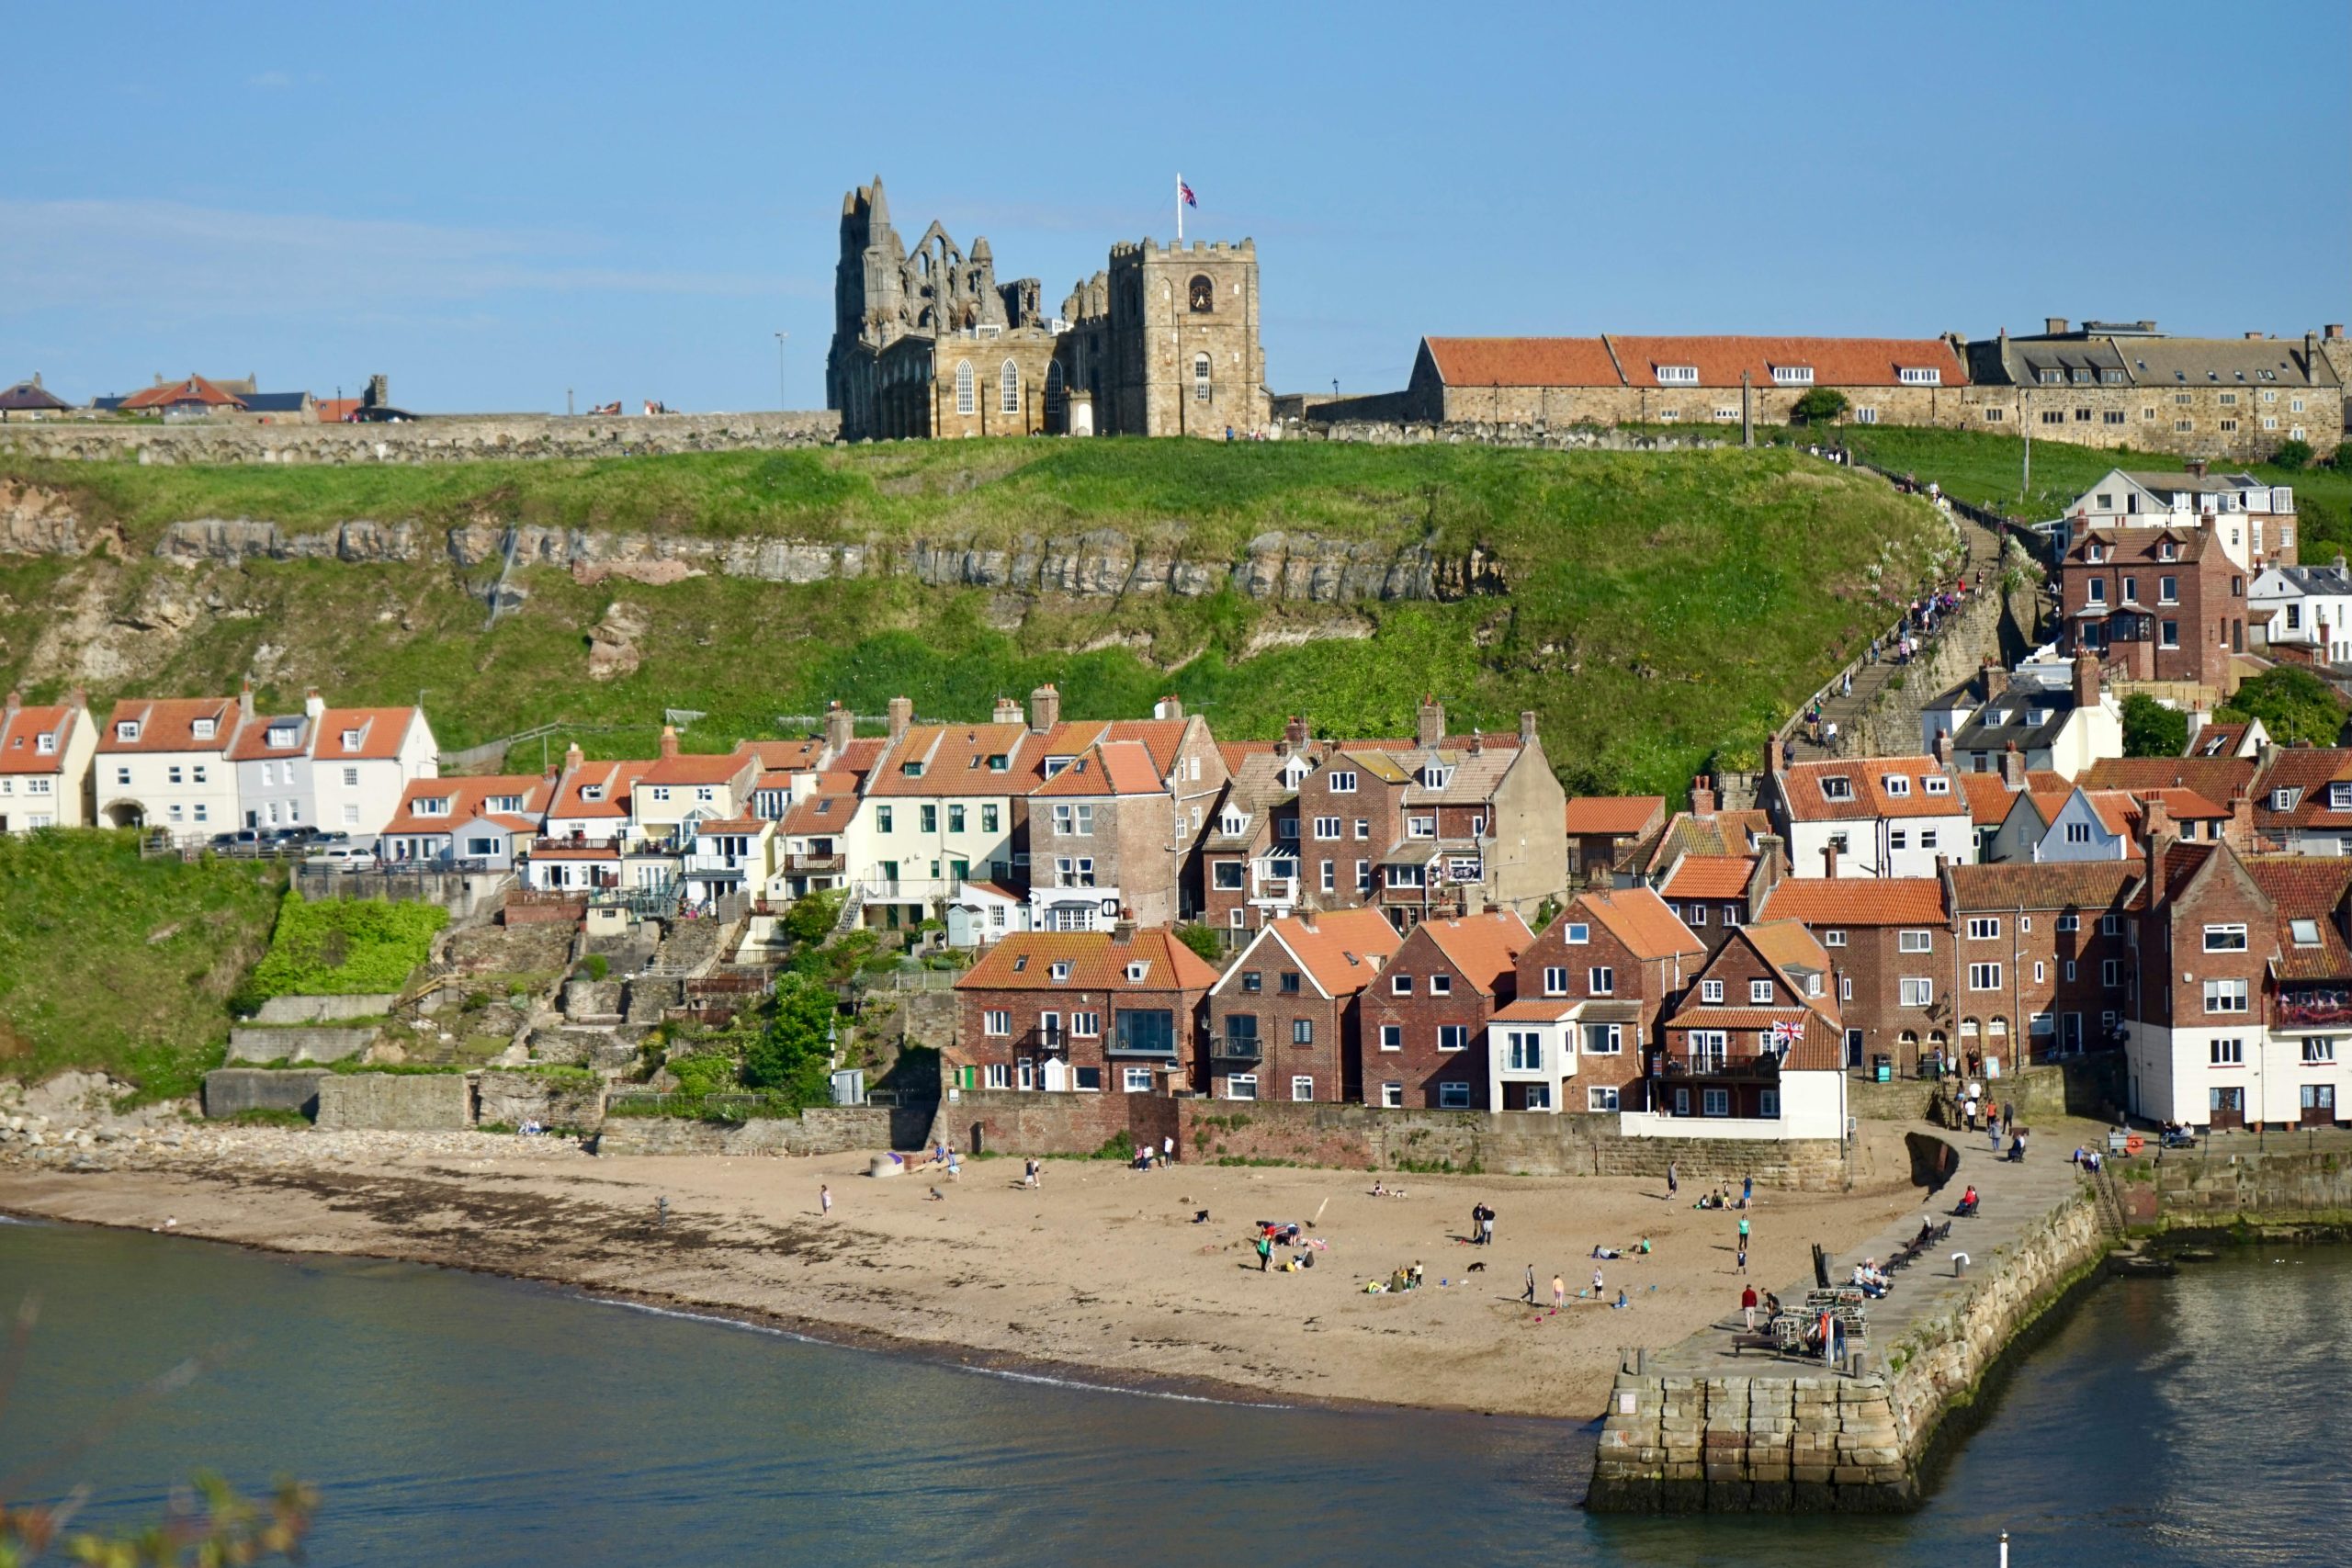 Scenic Image of Whitby provided for free by Pexels.com